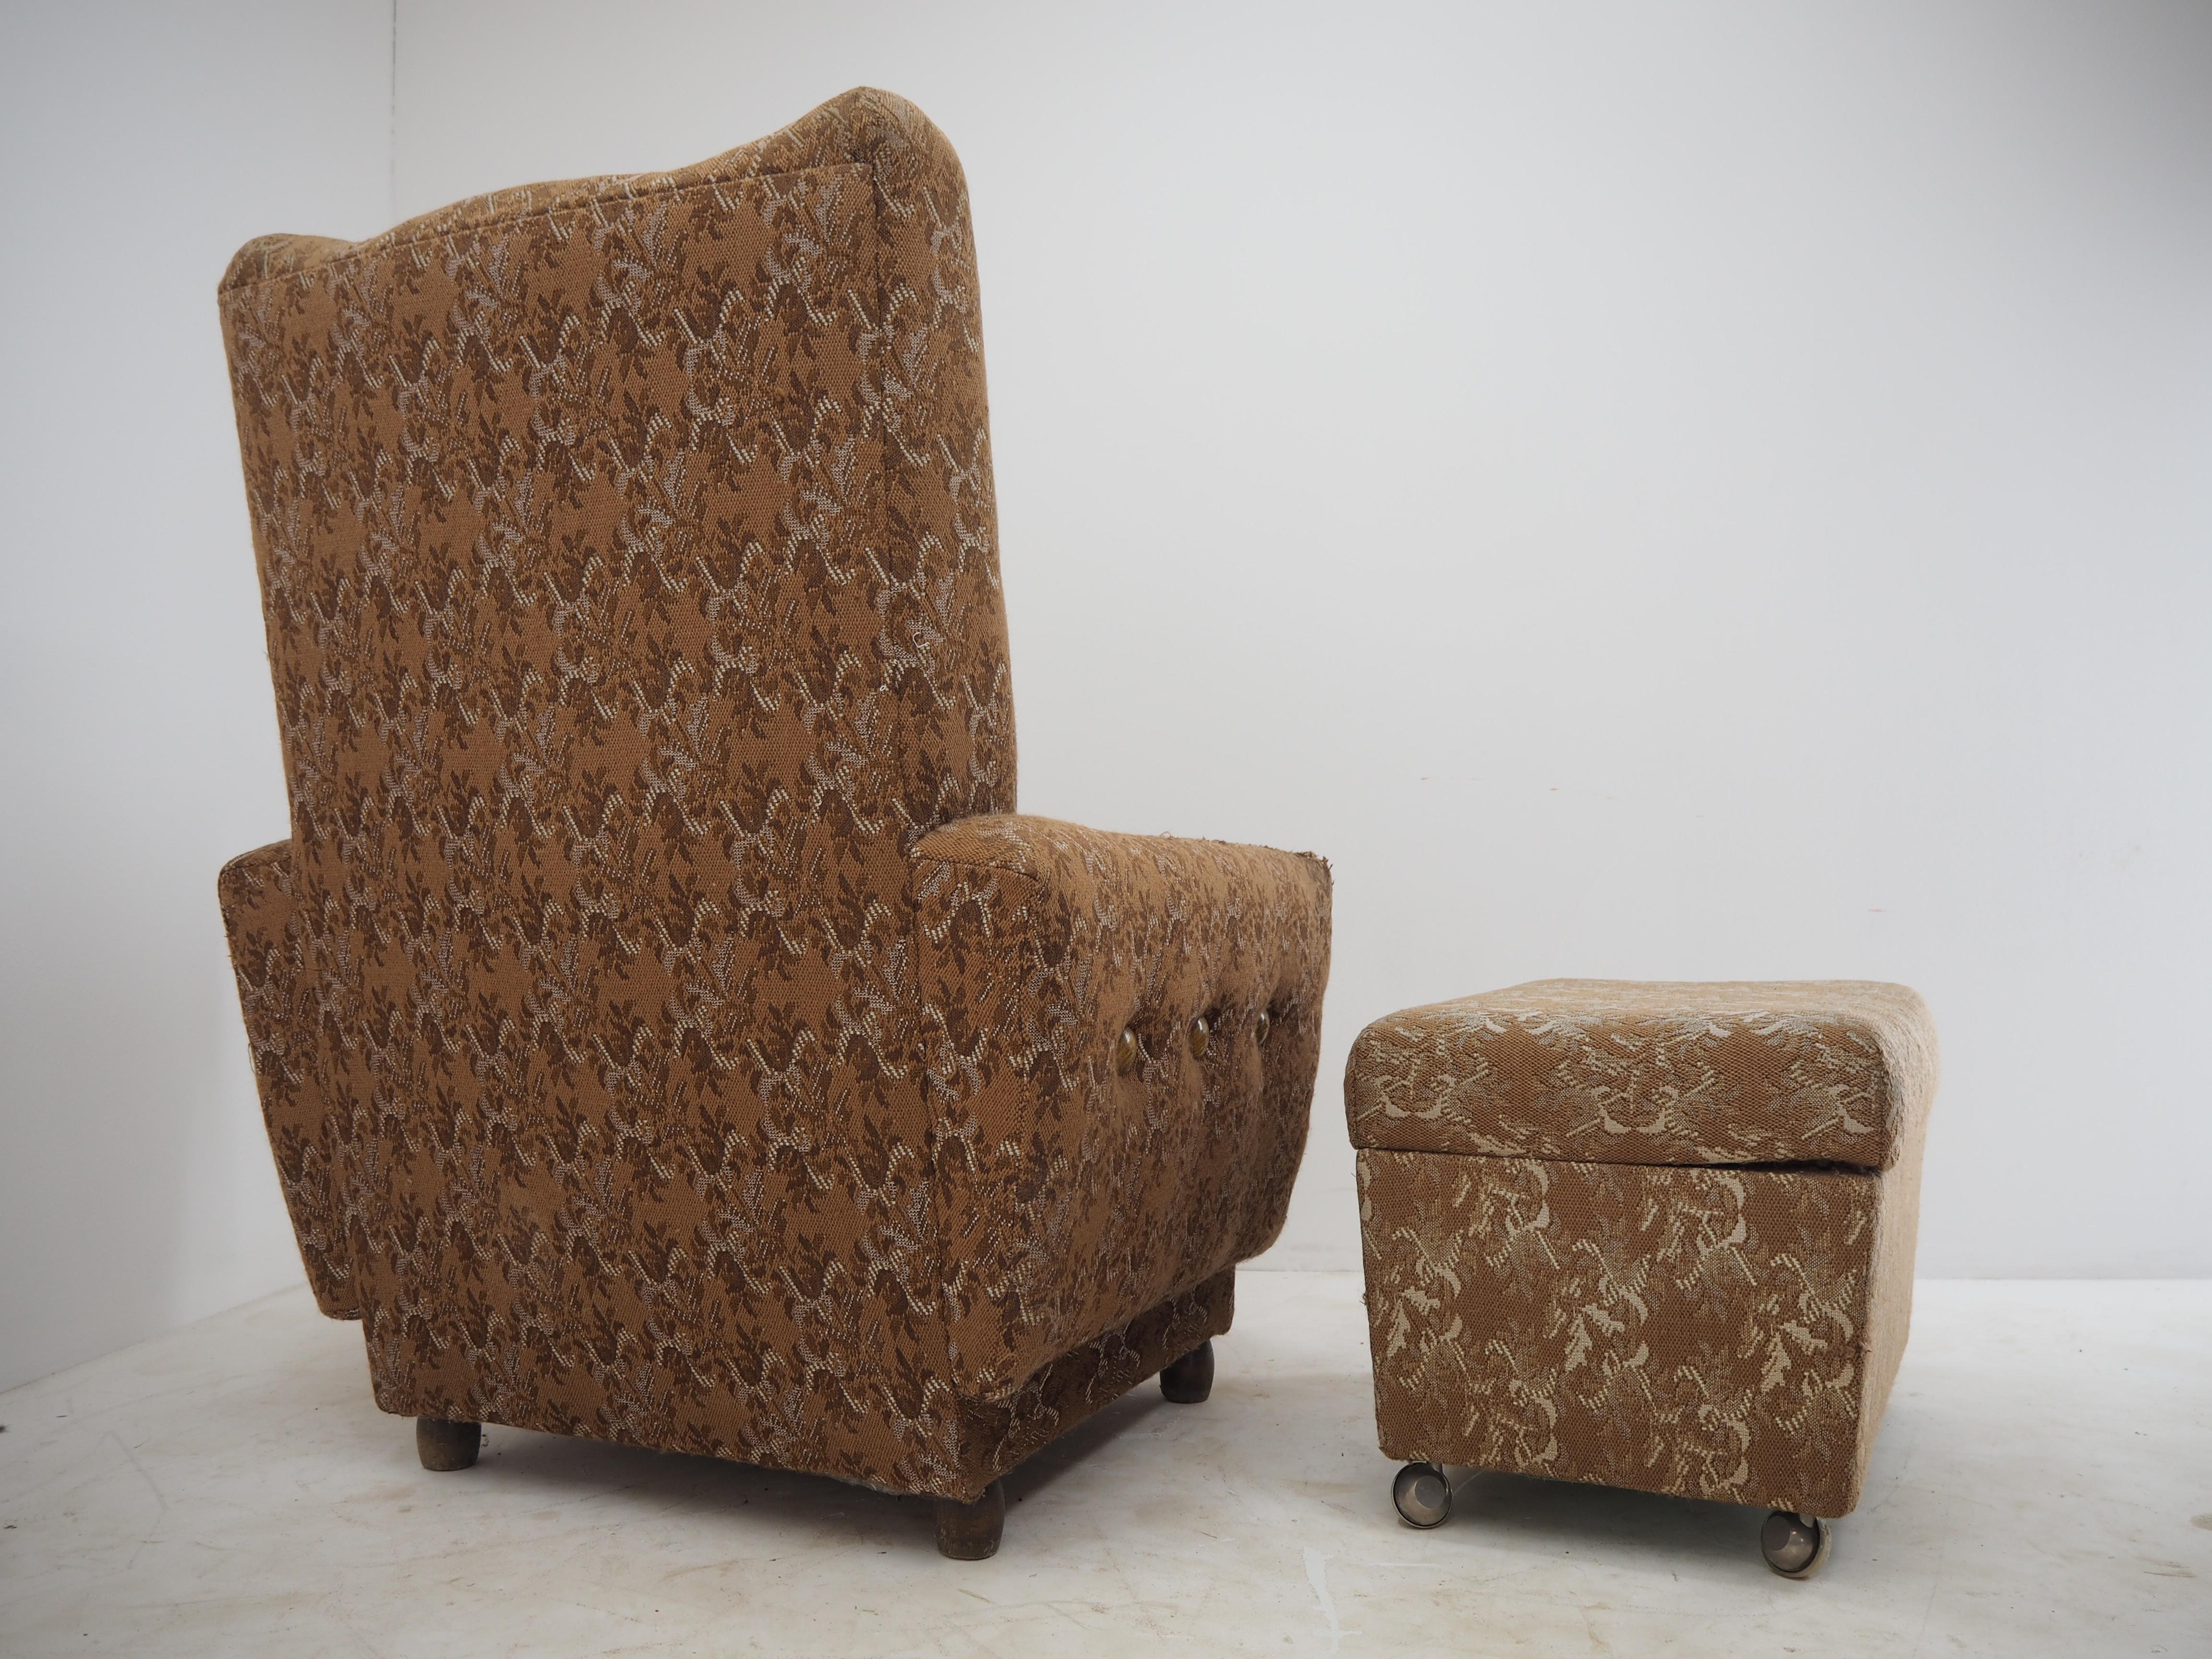 Midcentury Armchair with Footstool, 1960s For Sale 1